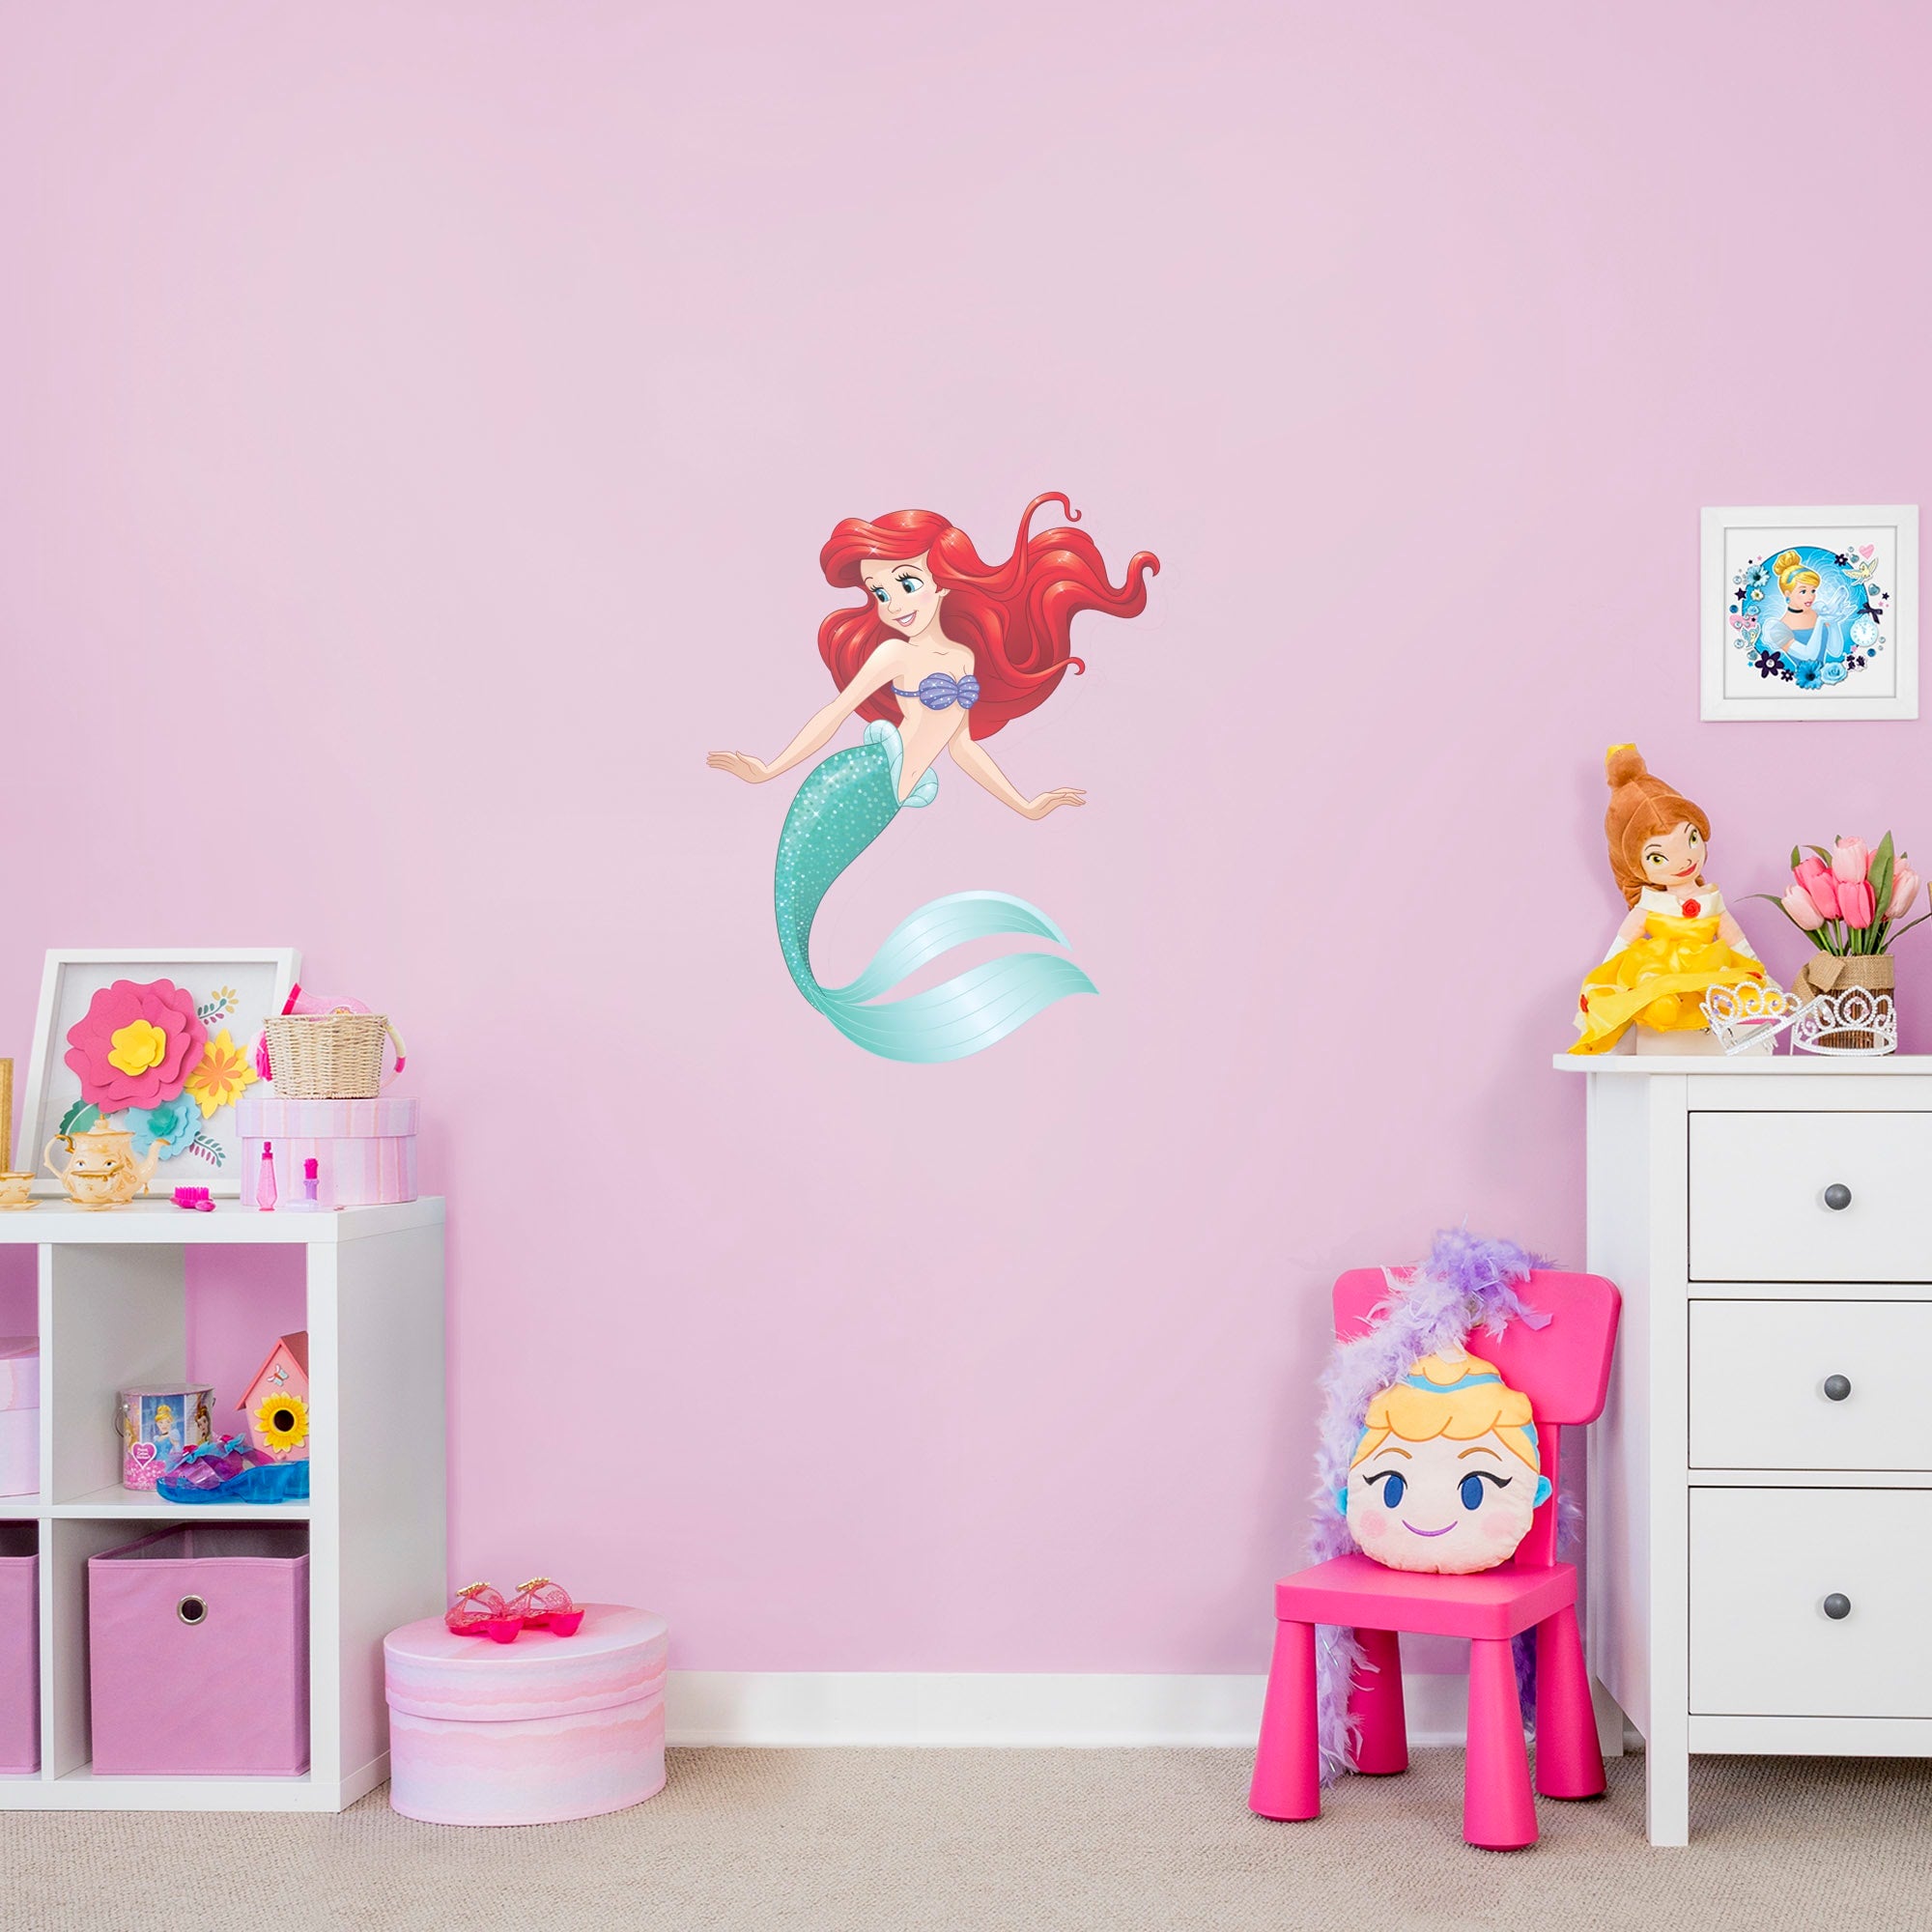 The Little Mermaid: Ariel and Friends - Officially Licensed Disney Removable Wall Decals XL by Fathead | Vinyl